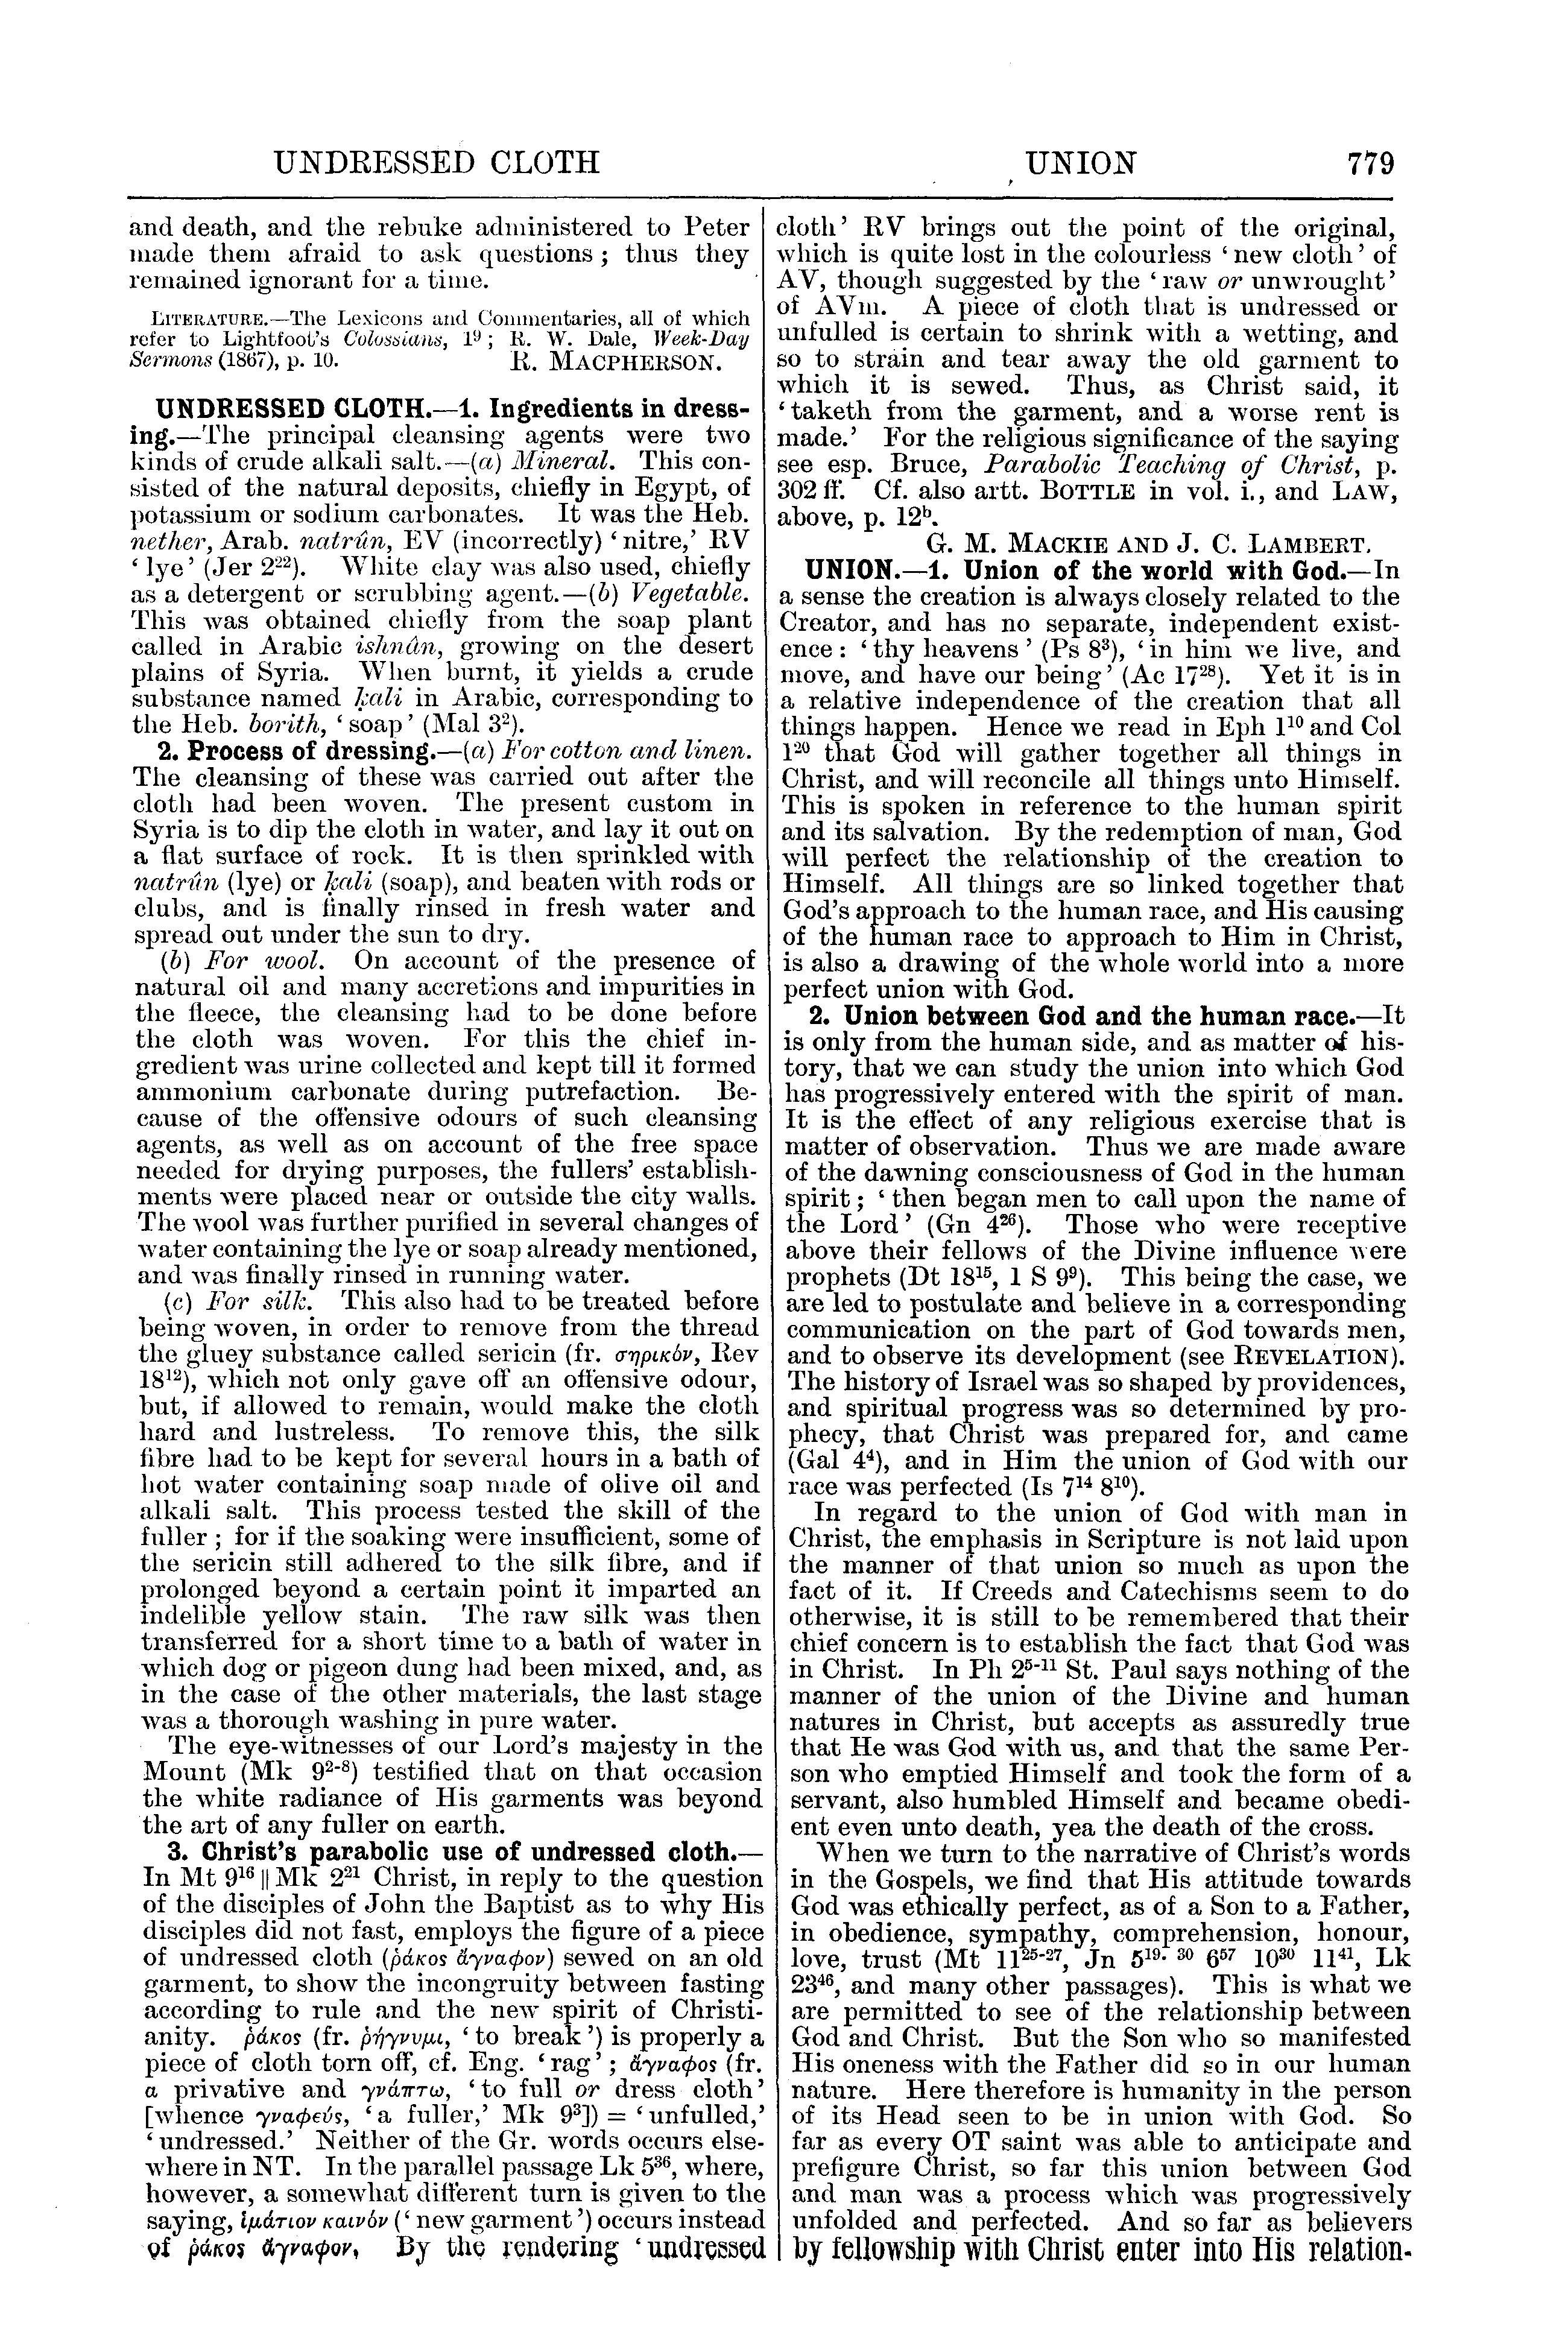 Image of page 779